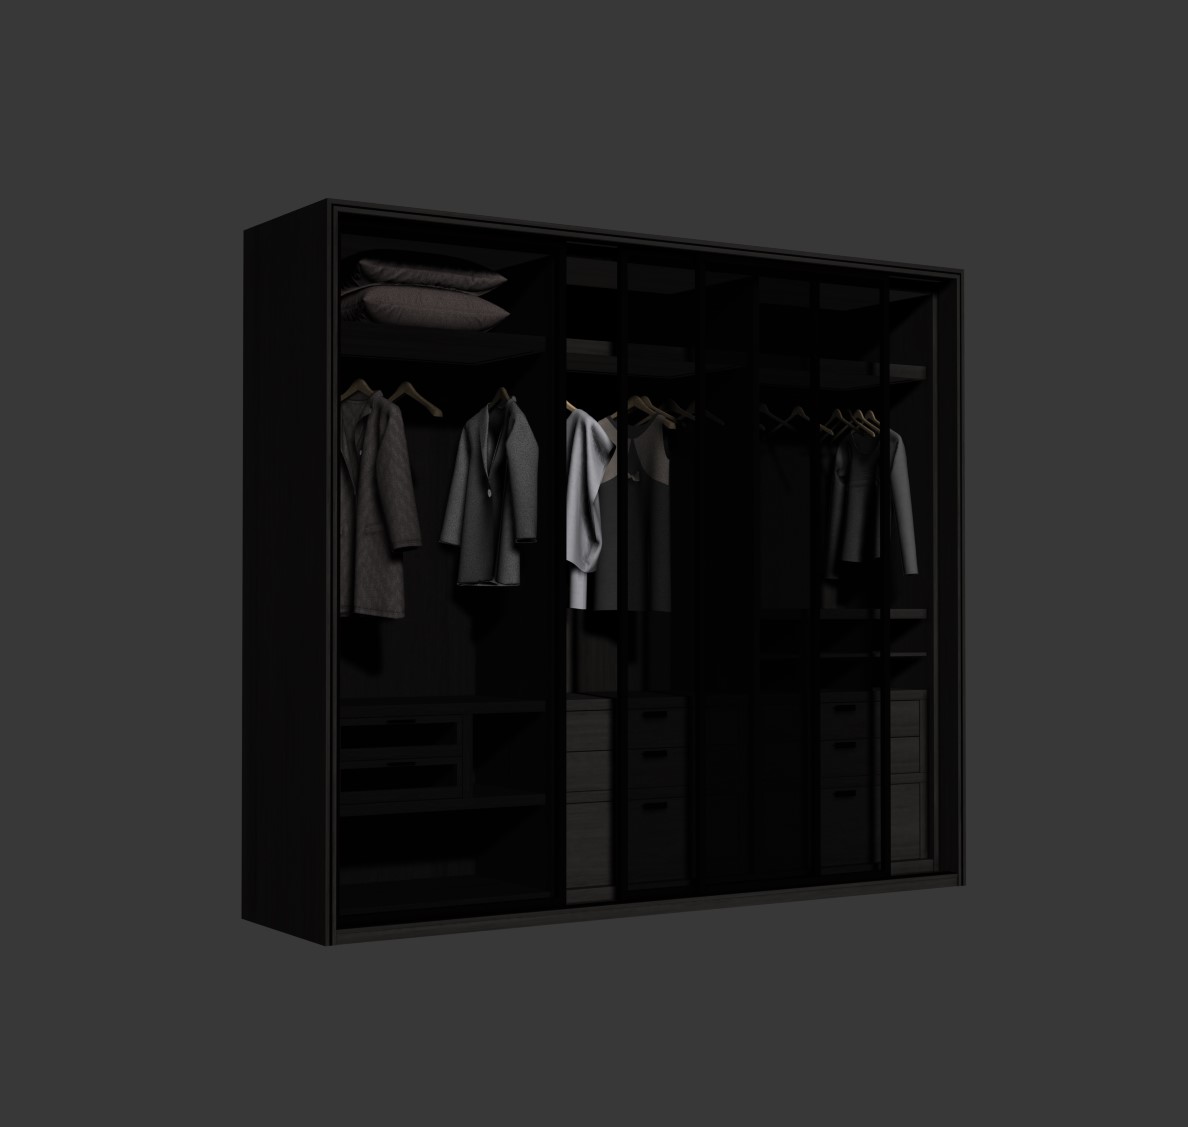 10011. Download Free Wardrobe Model by Huy Hieu Lee